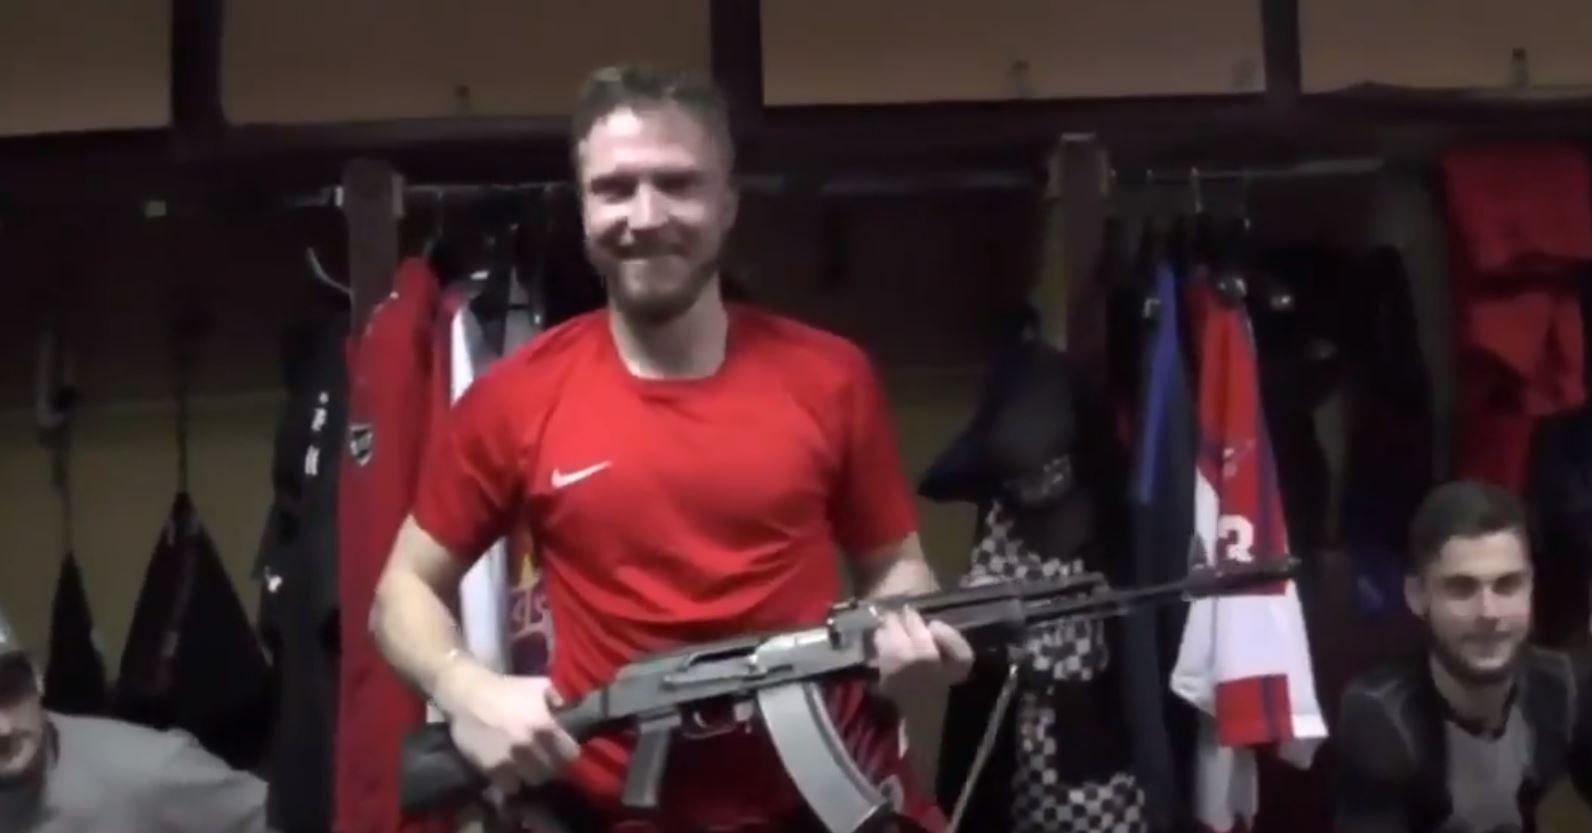 AK-47 awarded to Player of the Game in the Russian Hockey League